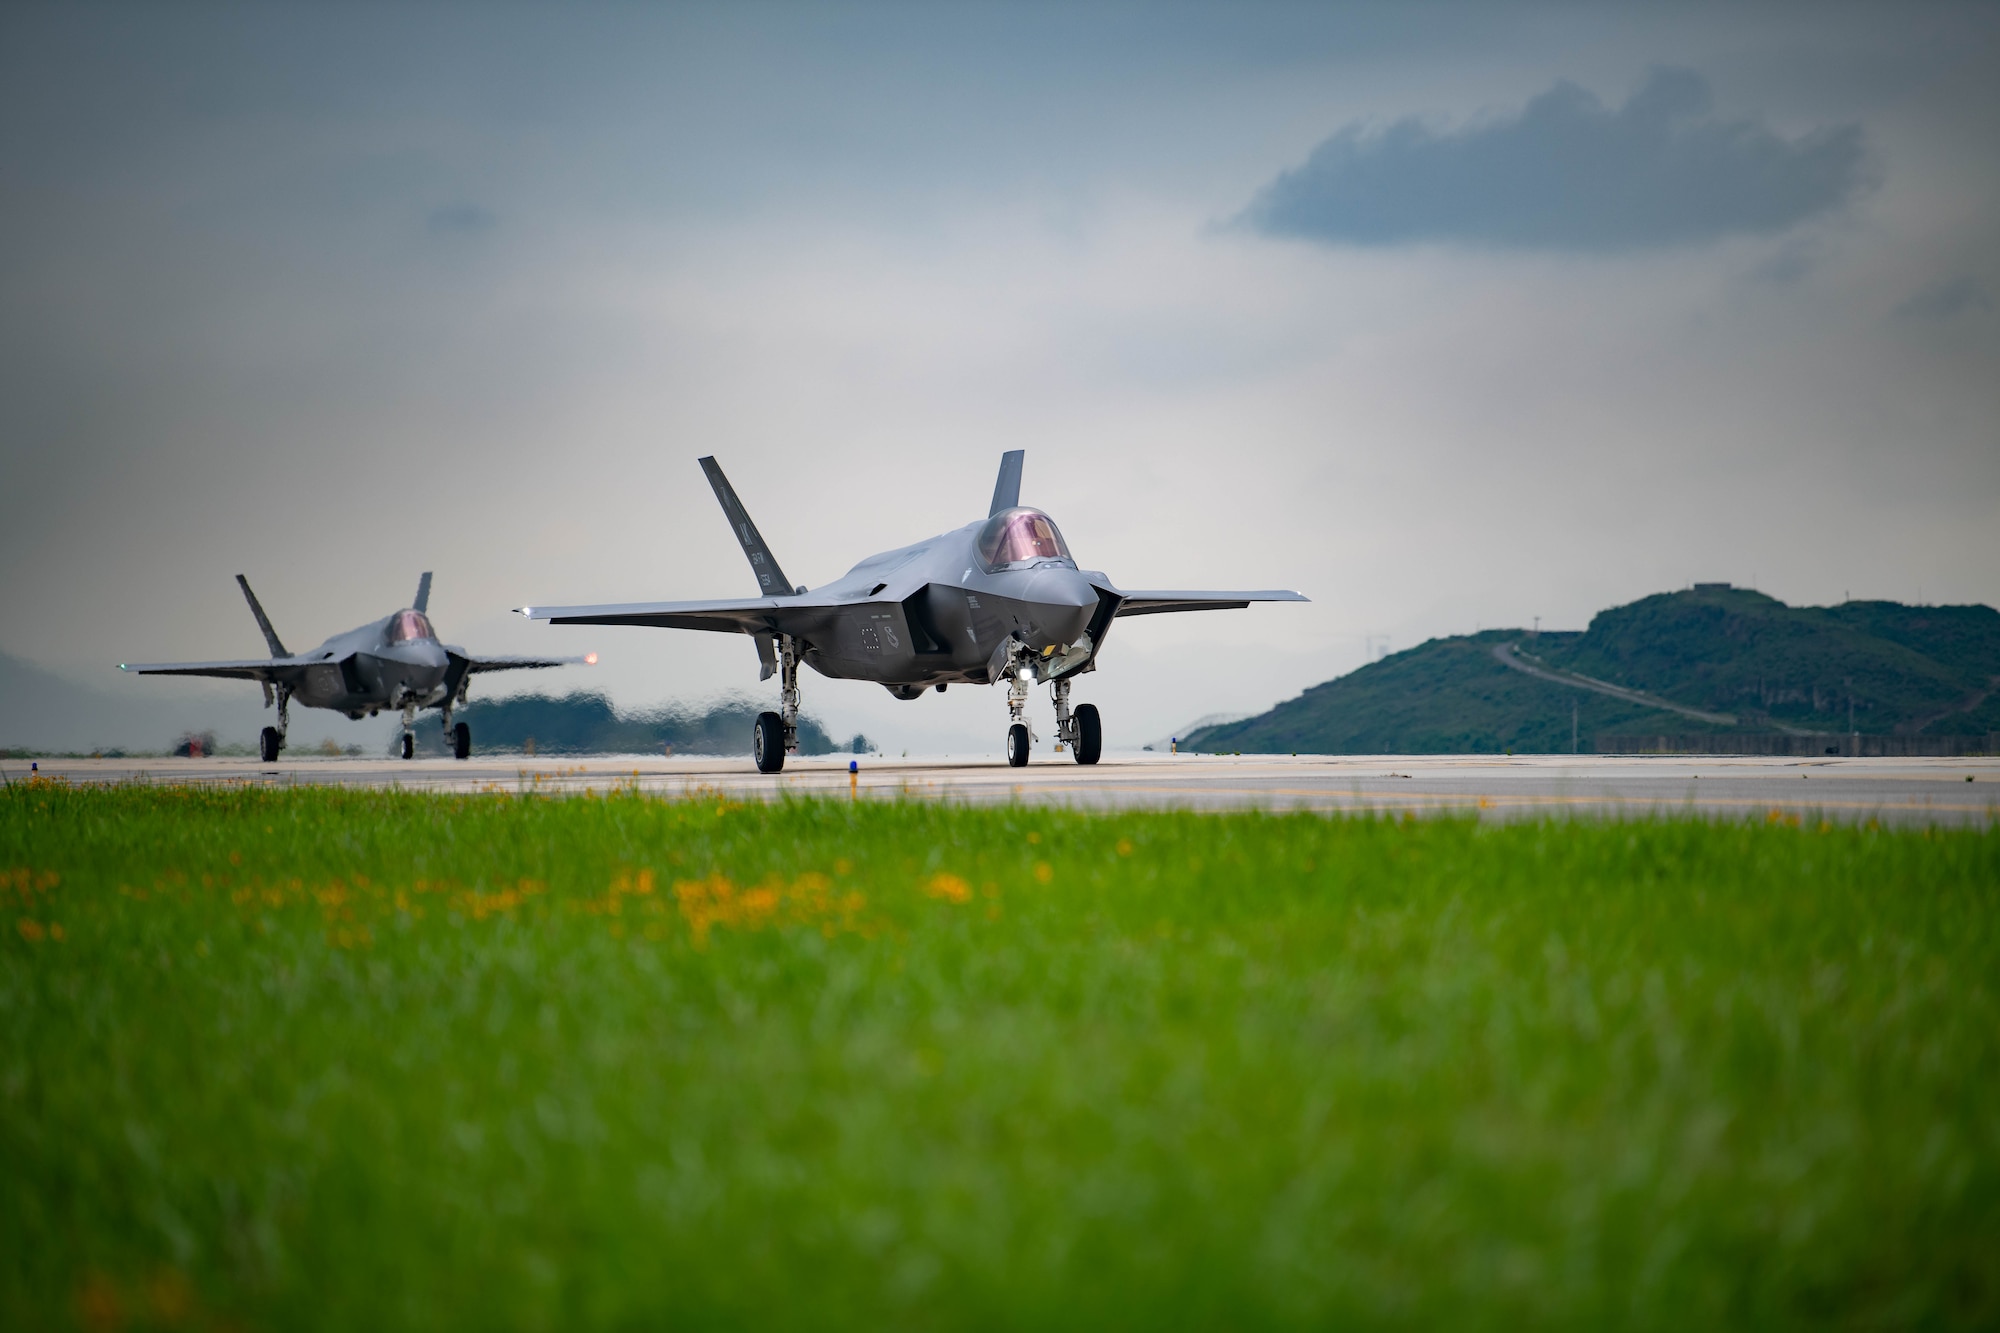 Two F-35A Lightning II’s taxi down a runway at Kunsan Air Base, Republic of Korea, July 11, 2022.U.S. Air Force F-35 aircraft from Eielson Air Force Base, Alaska arrived in the Republic of Korea to conduct training flights with ROKAF to enhance interoperability between the two Air Forces on and
around the Korean Peninsula. (U.S. Air Force photo by Senior Airman Shannon Braaten)